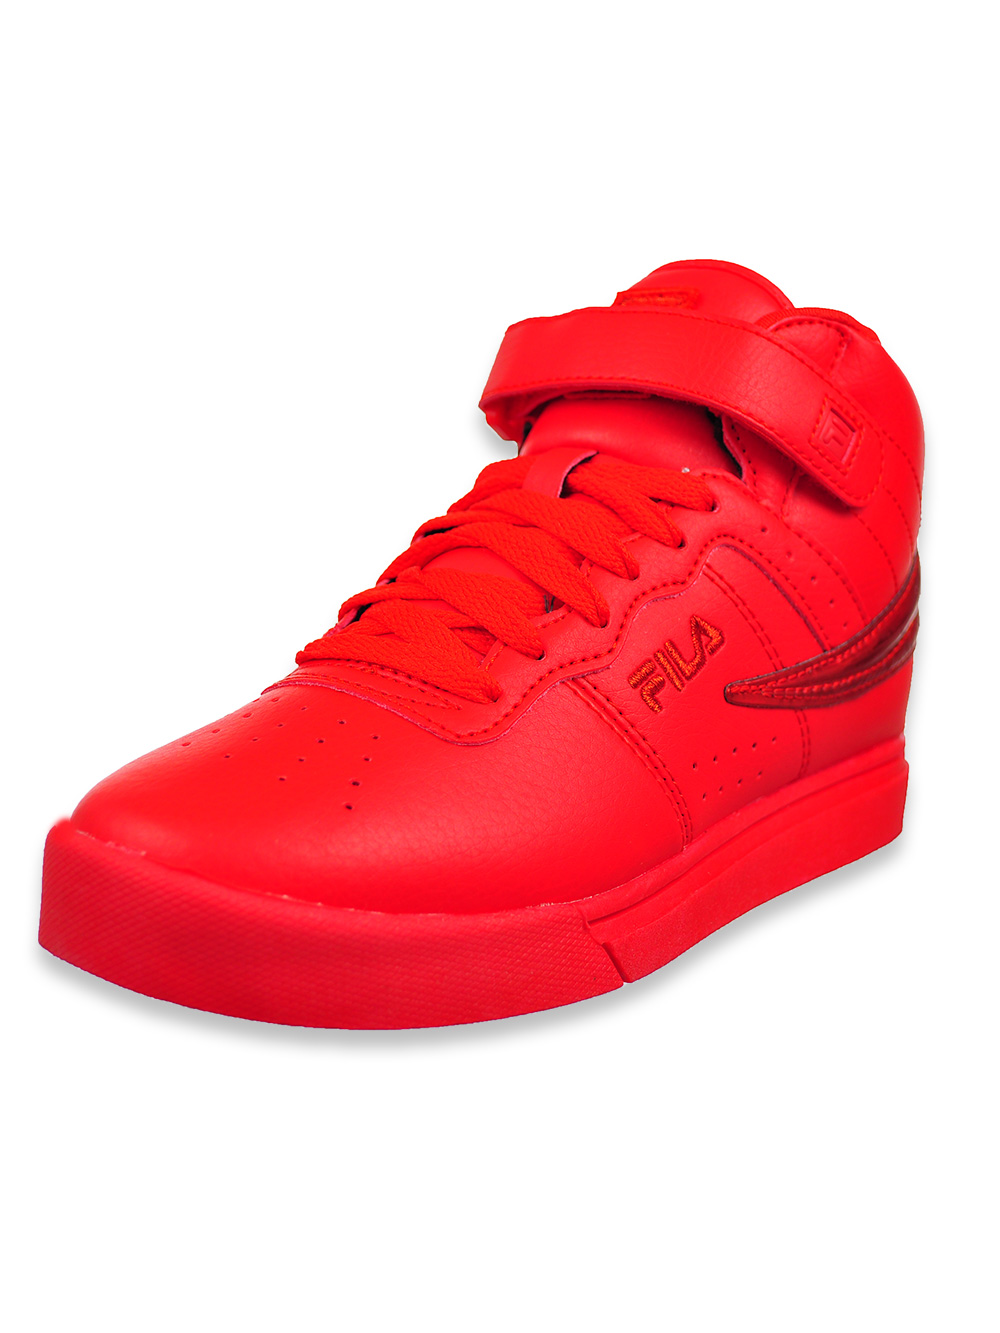 red high top filas